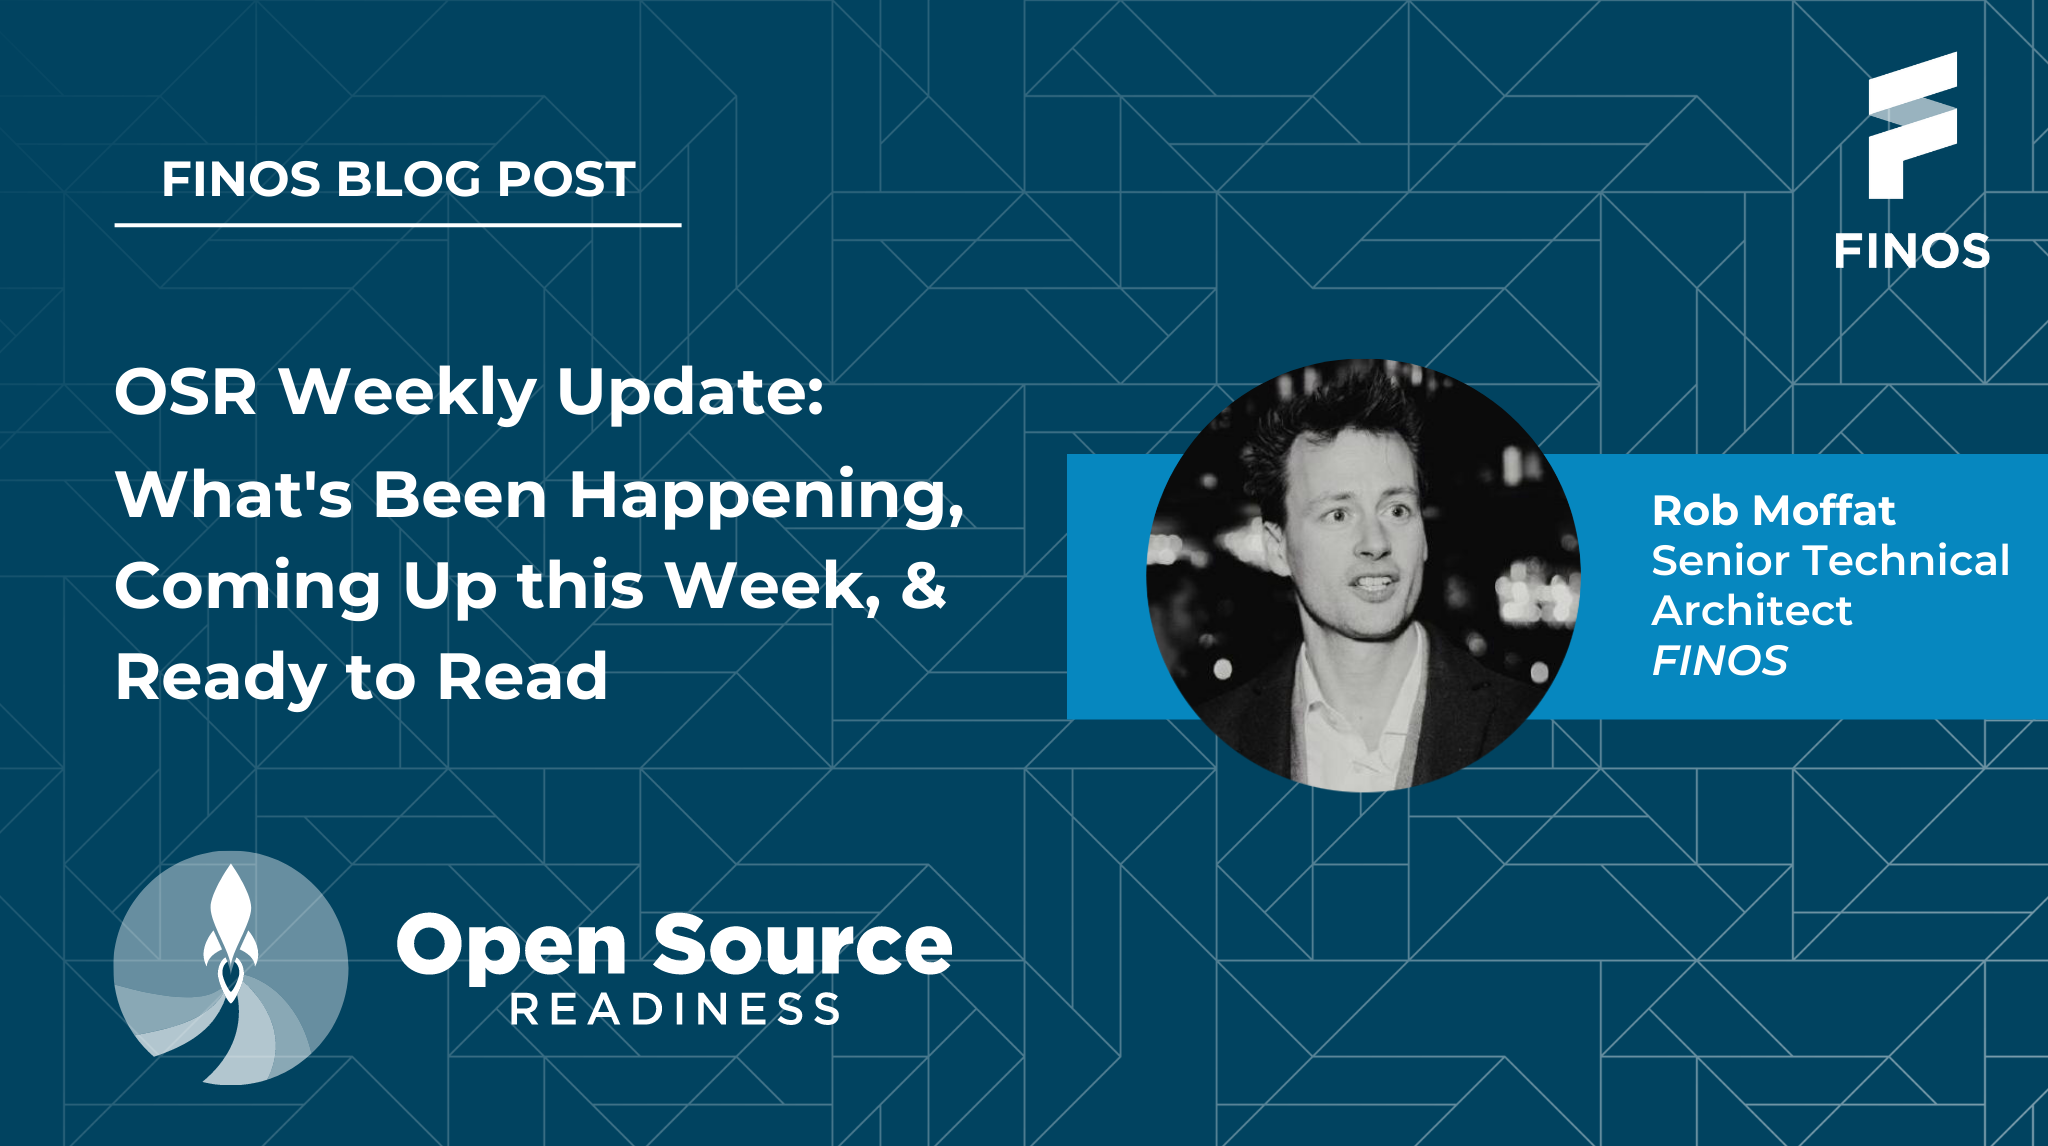 What's Been Happening, Coming Up this Week, & Ready to Read - Rob Moffat